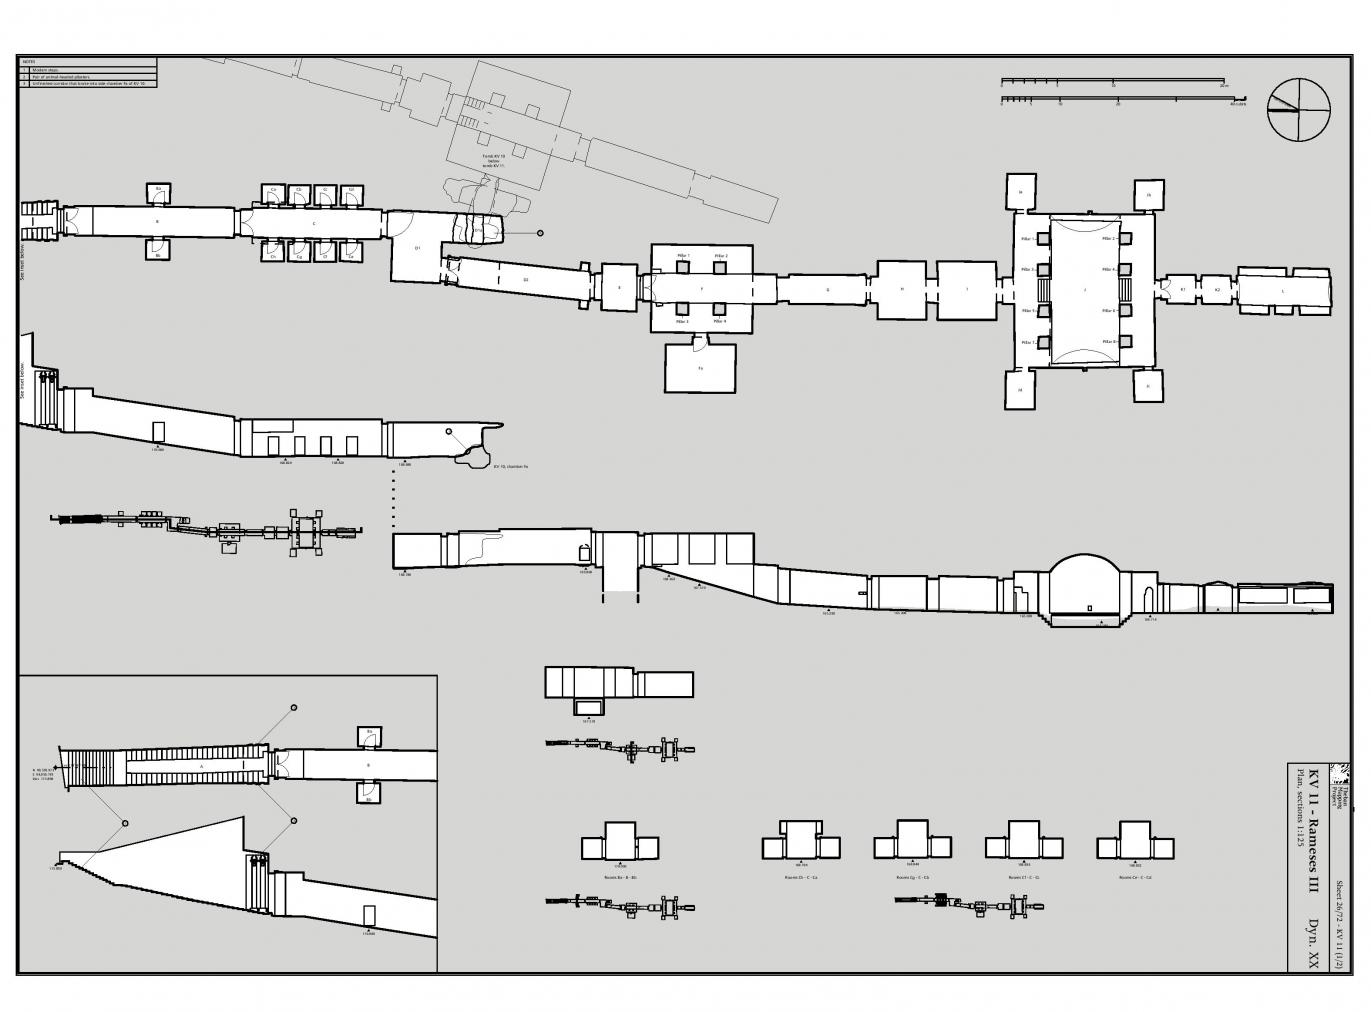 KV11 Plan and Section